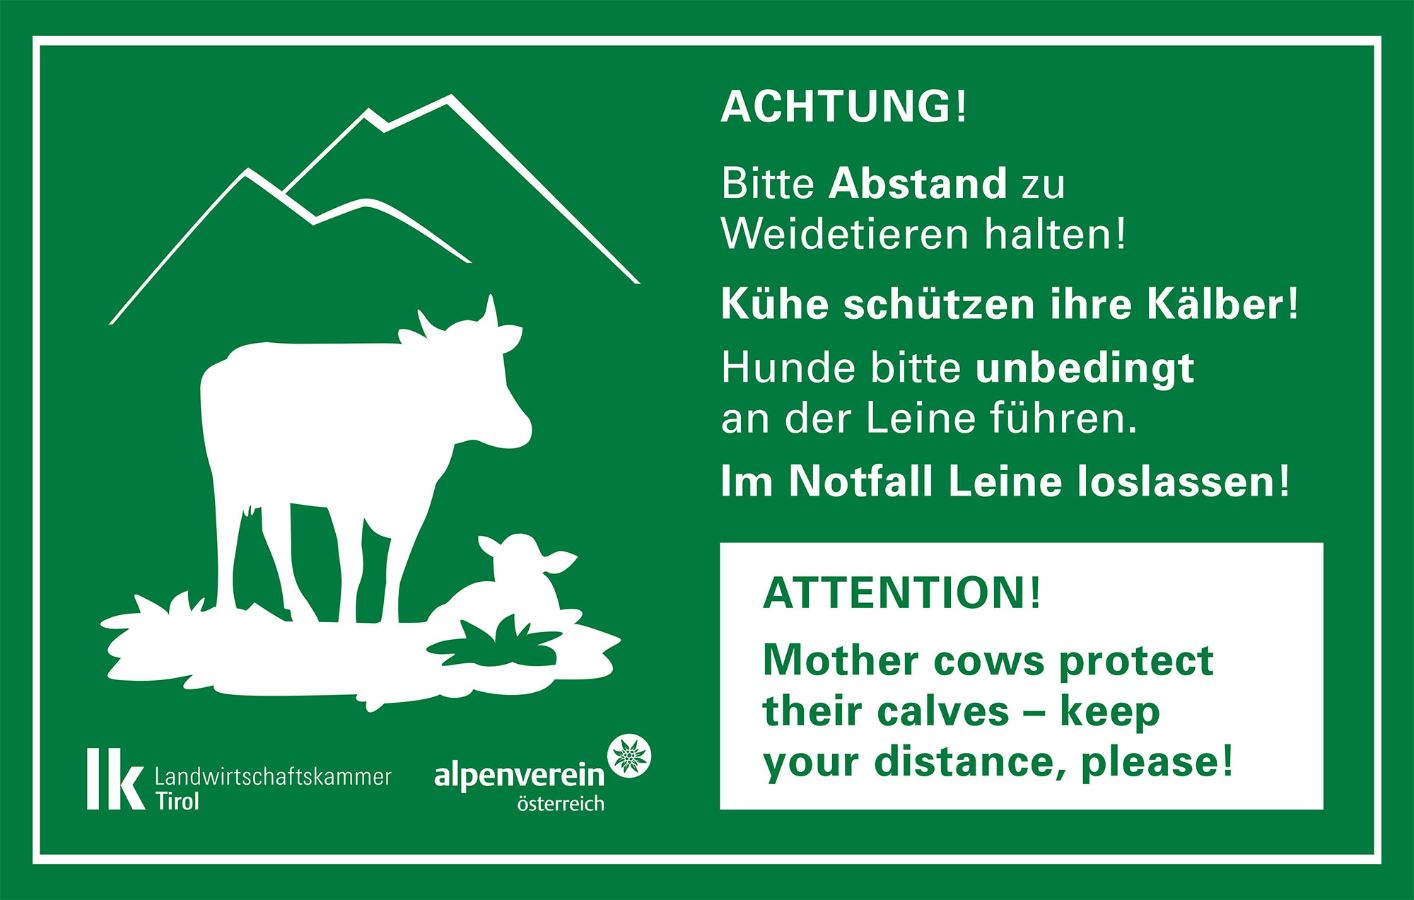 Attention! Please keep your distance! Cows protect their calves! Dogs must be kept on a leash. In case of emergency let go of the leash!